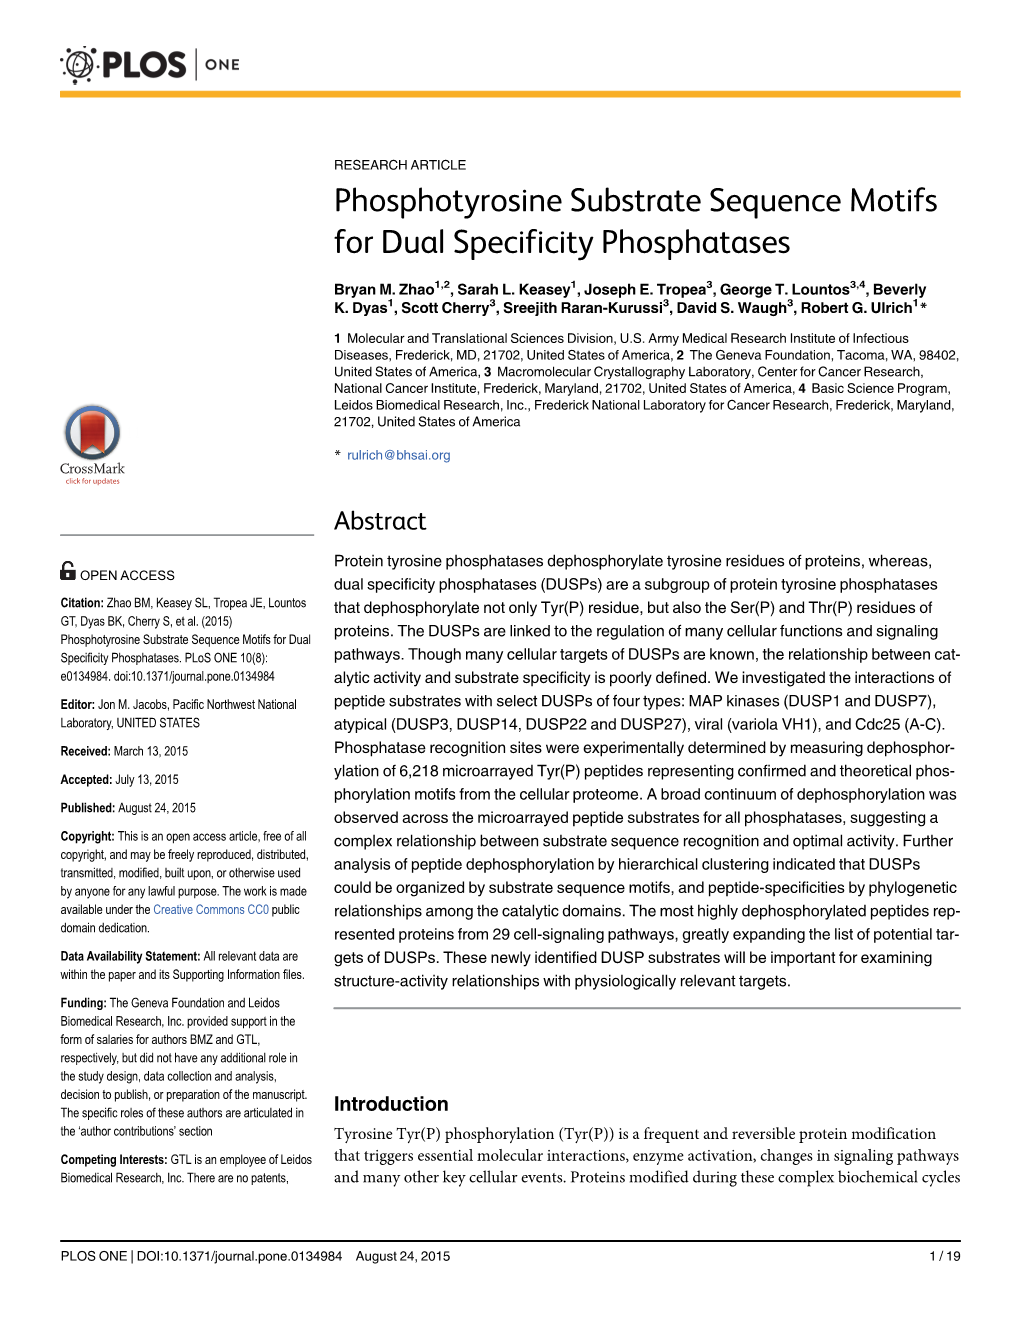 Phosphotyrosine Substrate Sequence Motifs for Dual Specificity Phosphatases